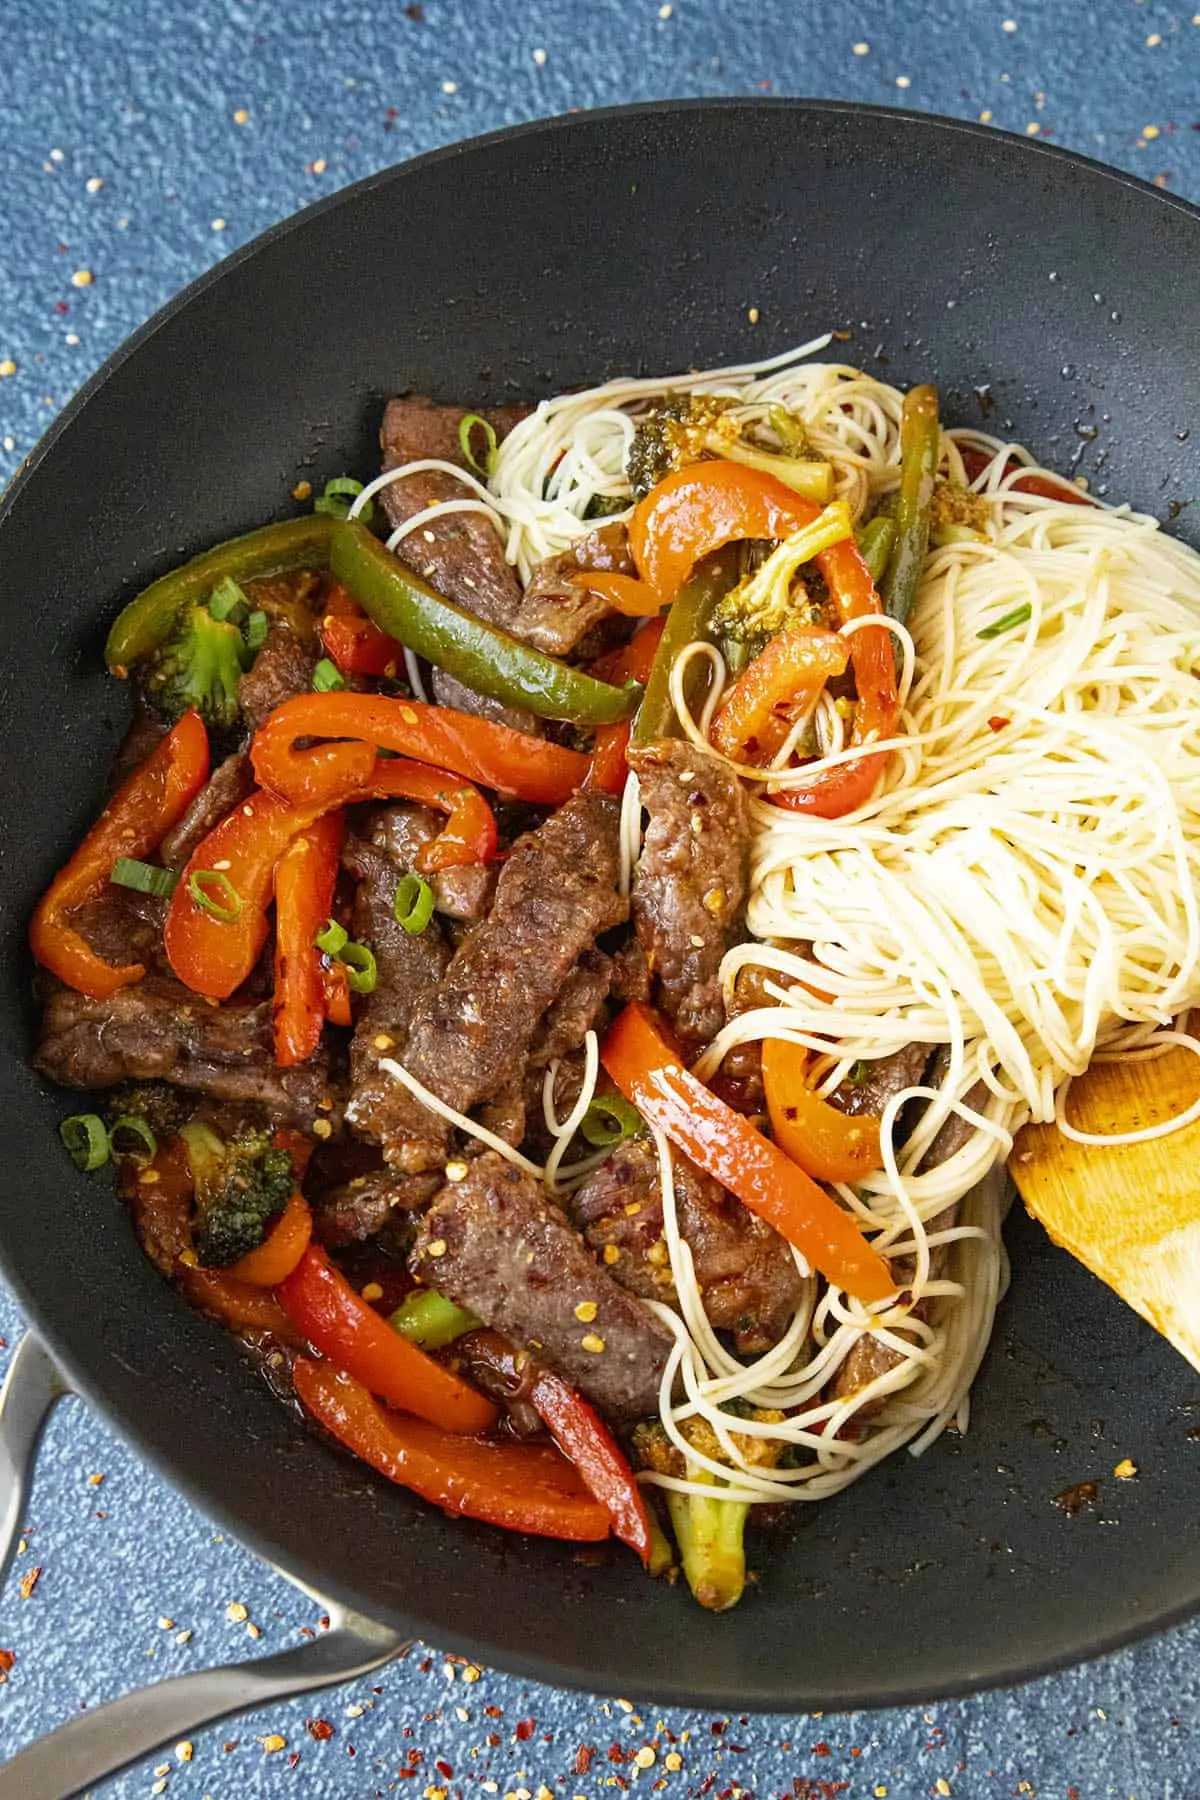 Stirring noodles into the Beef Stir Fry